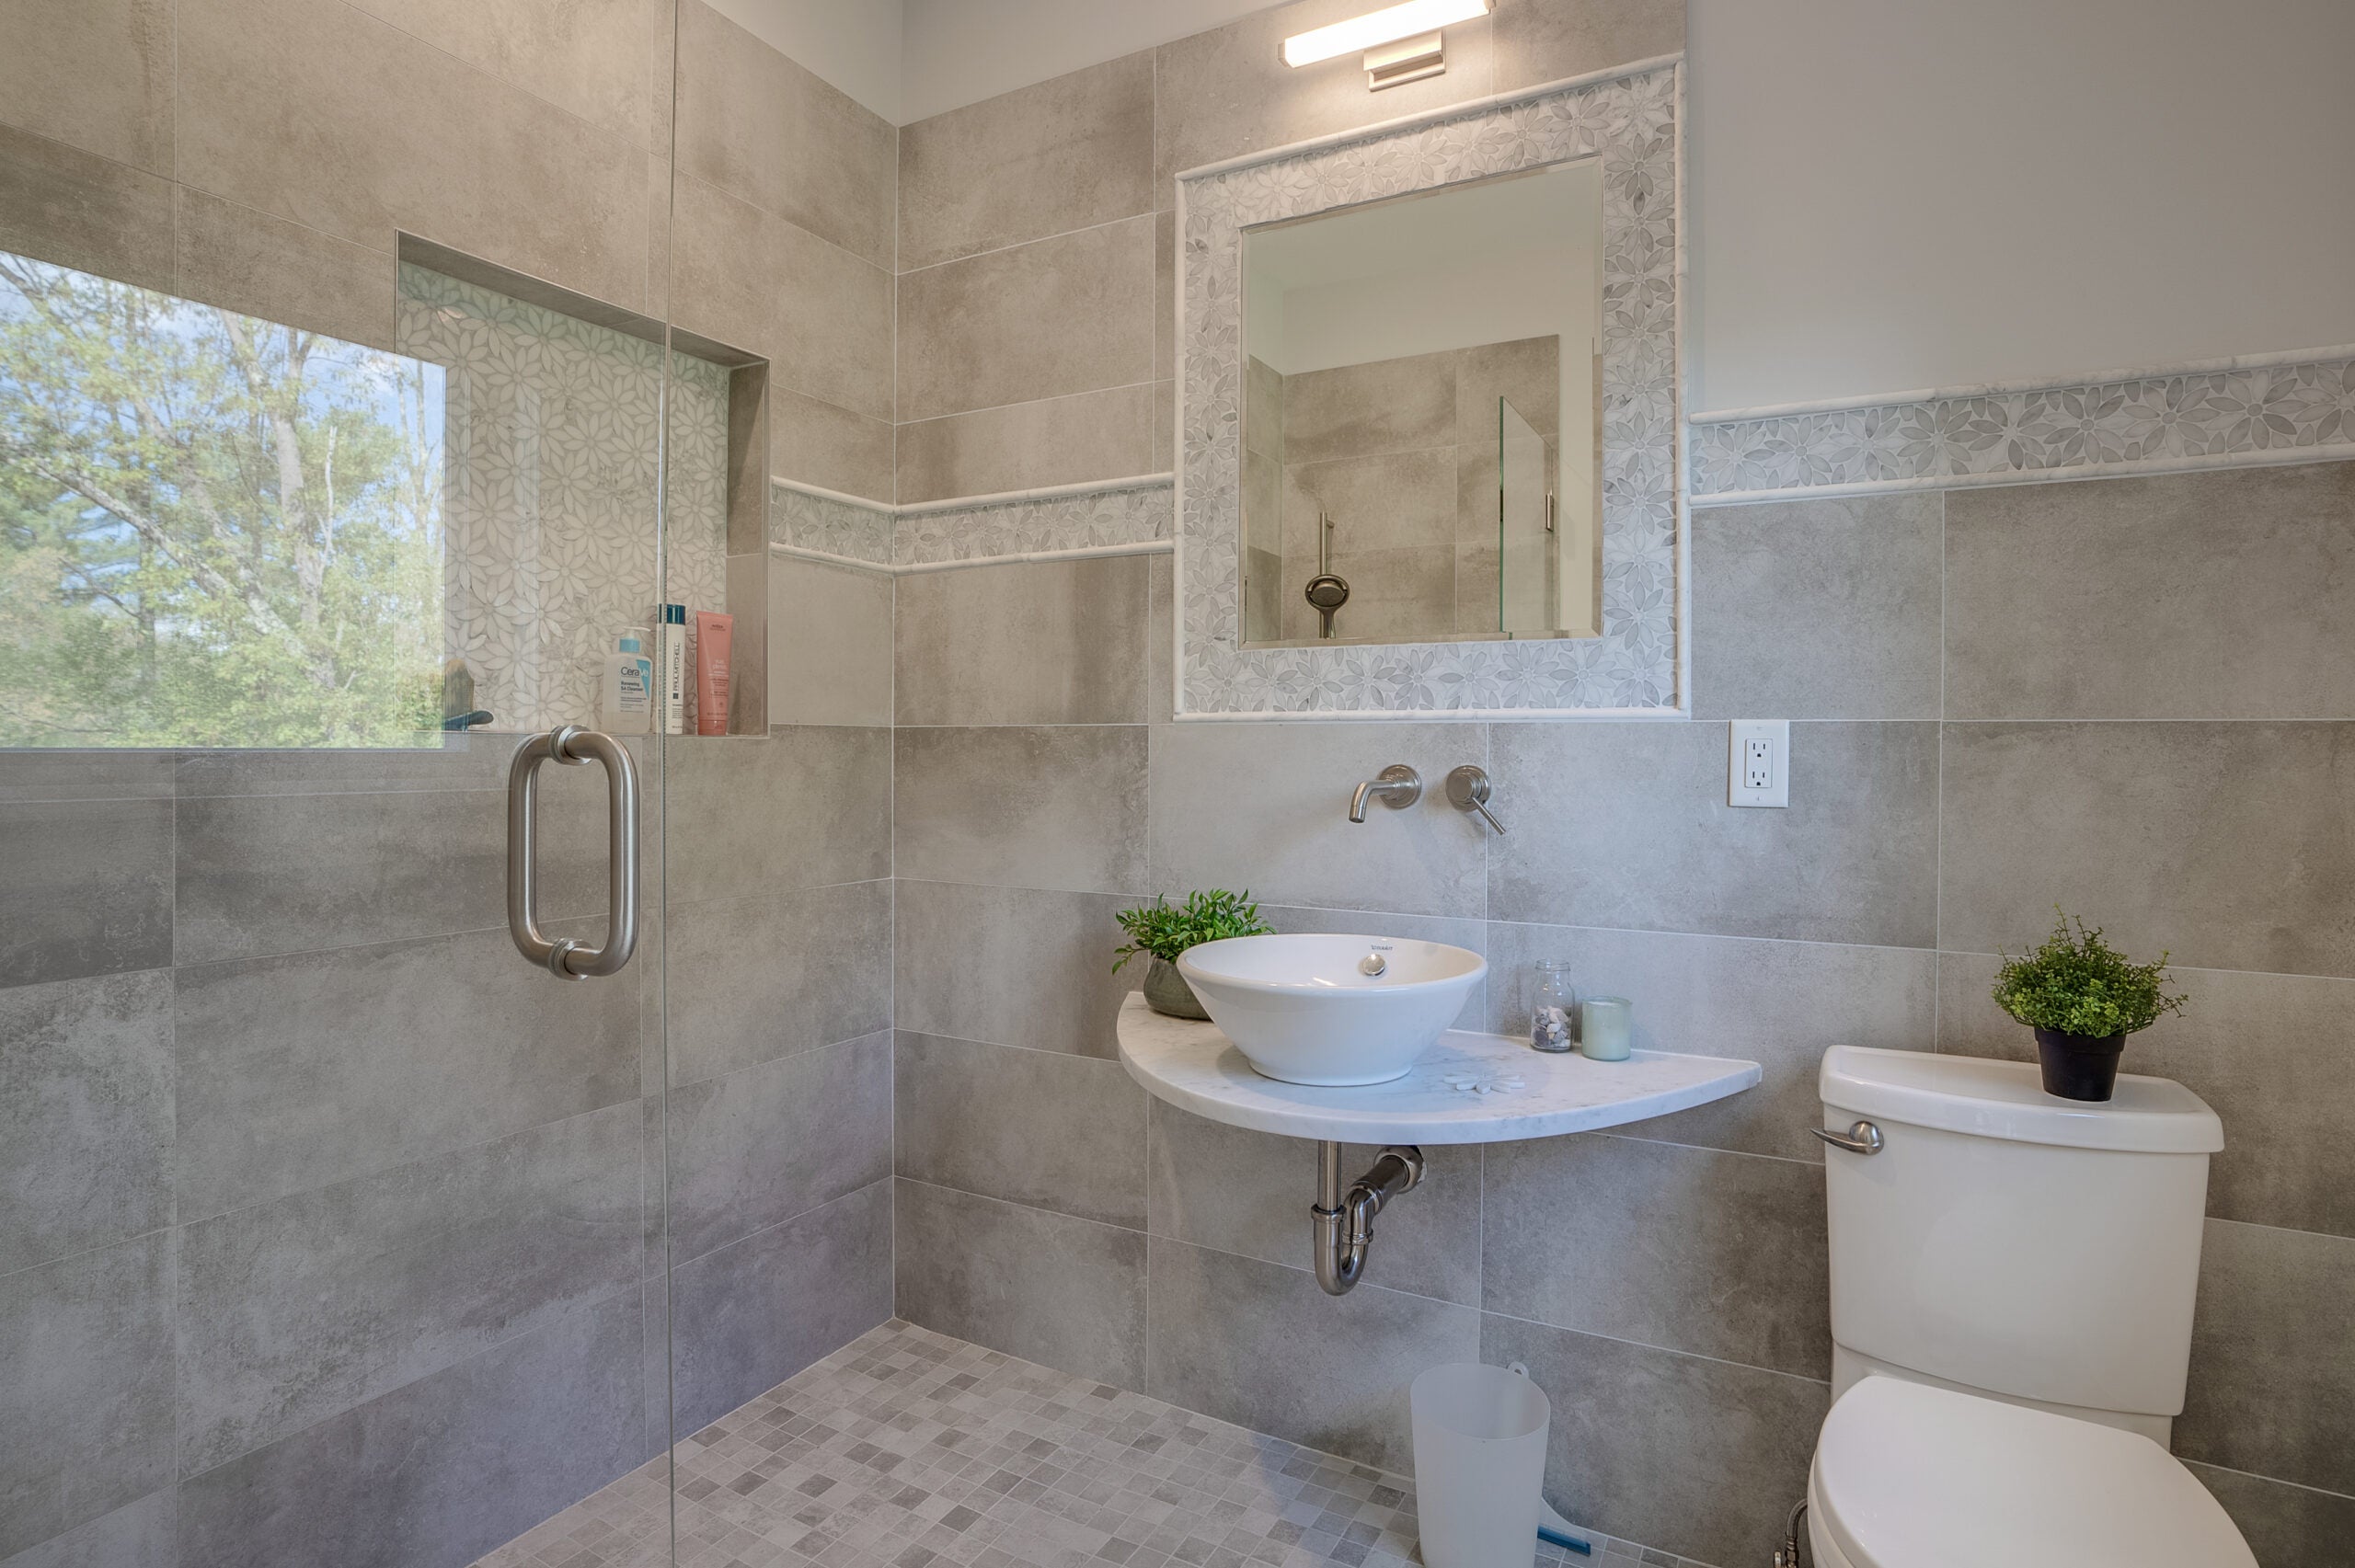 A bathroom with a glass-enclosed shower and a wall-mounted stone sink.